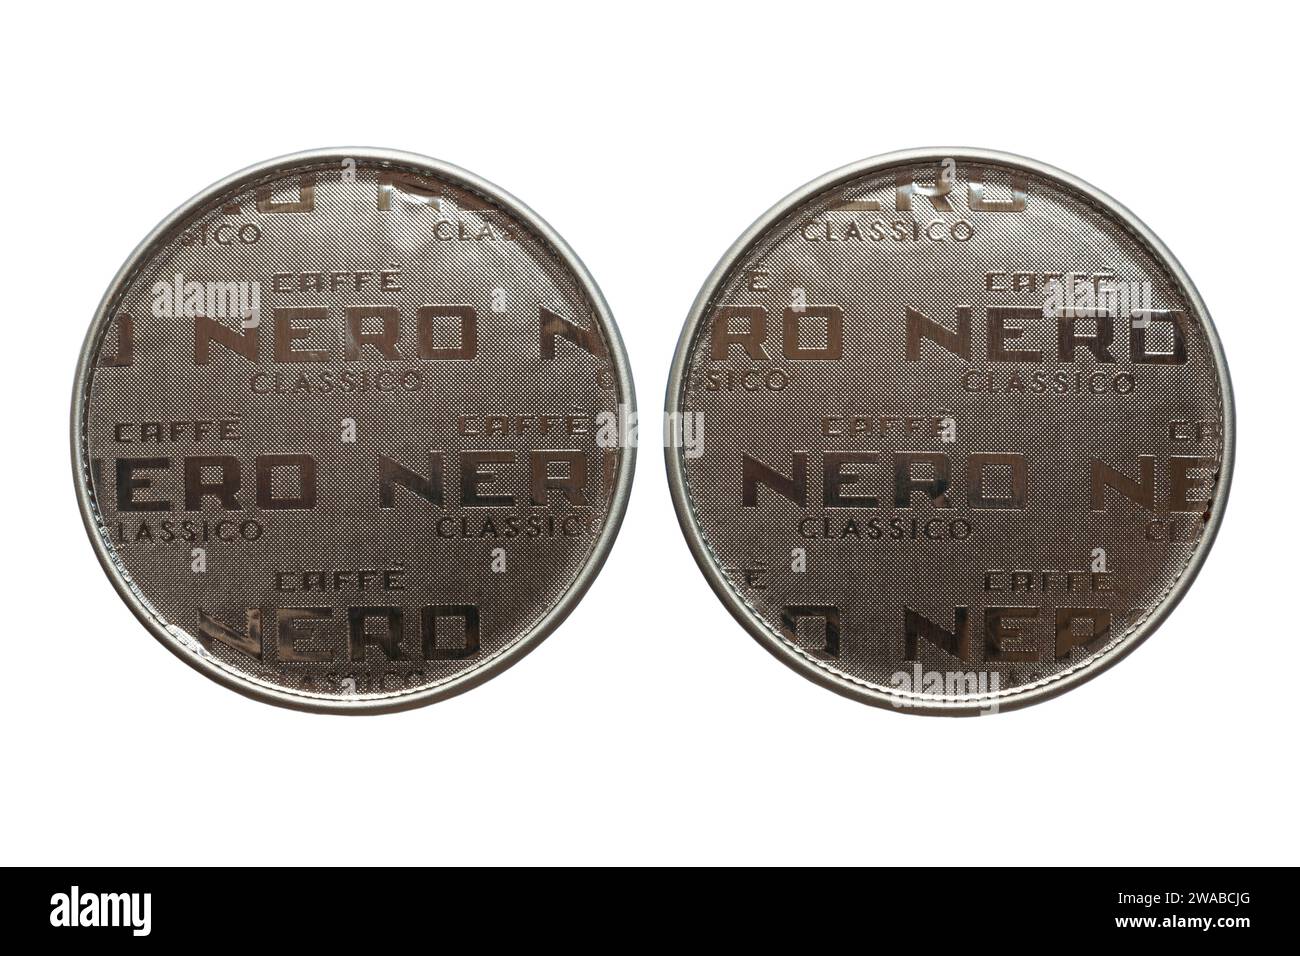 Caffe Nero Classico Original Blend coffee capsules coffee pods isolated on white background Stock Photo